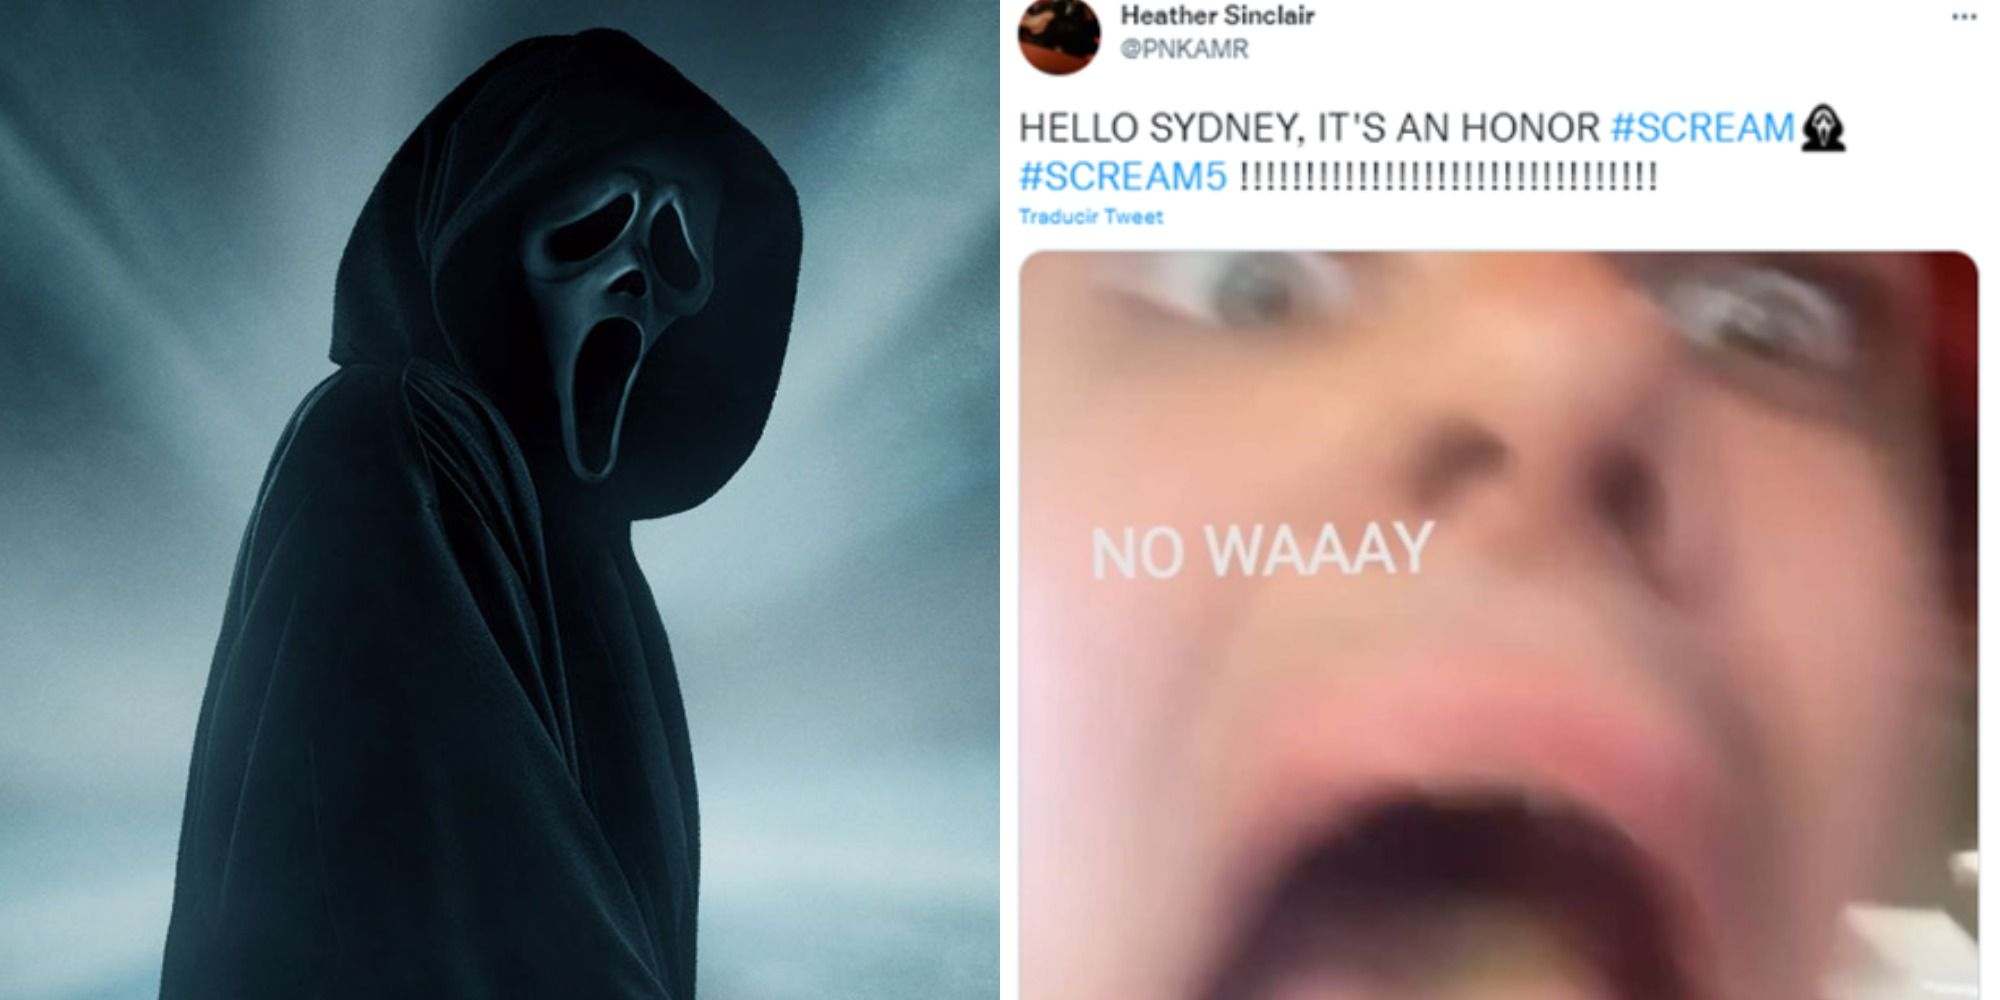 The 10 Best Twitter Reactions & Memes To The Scream 5 Trailer